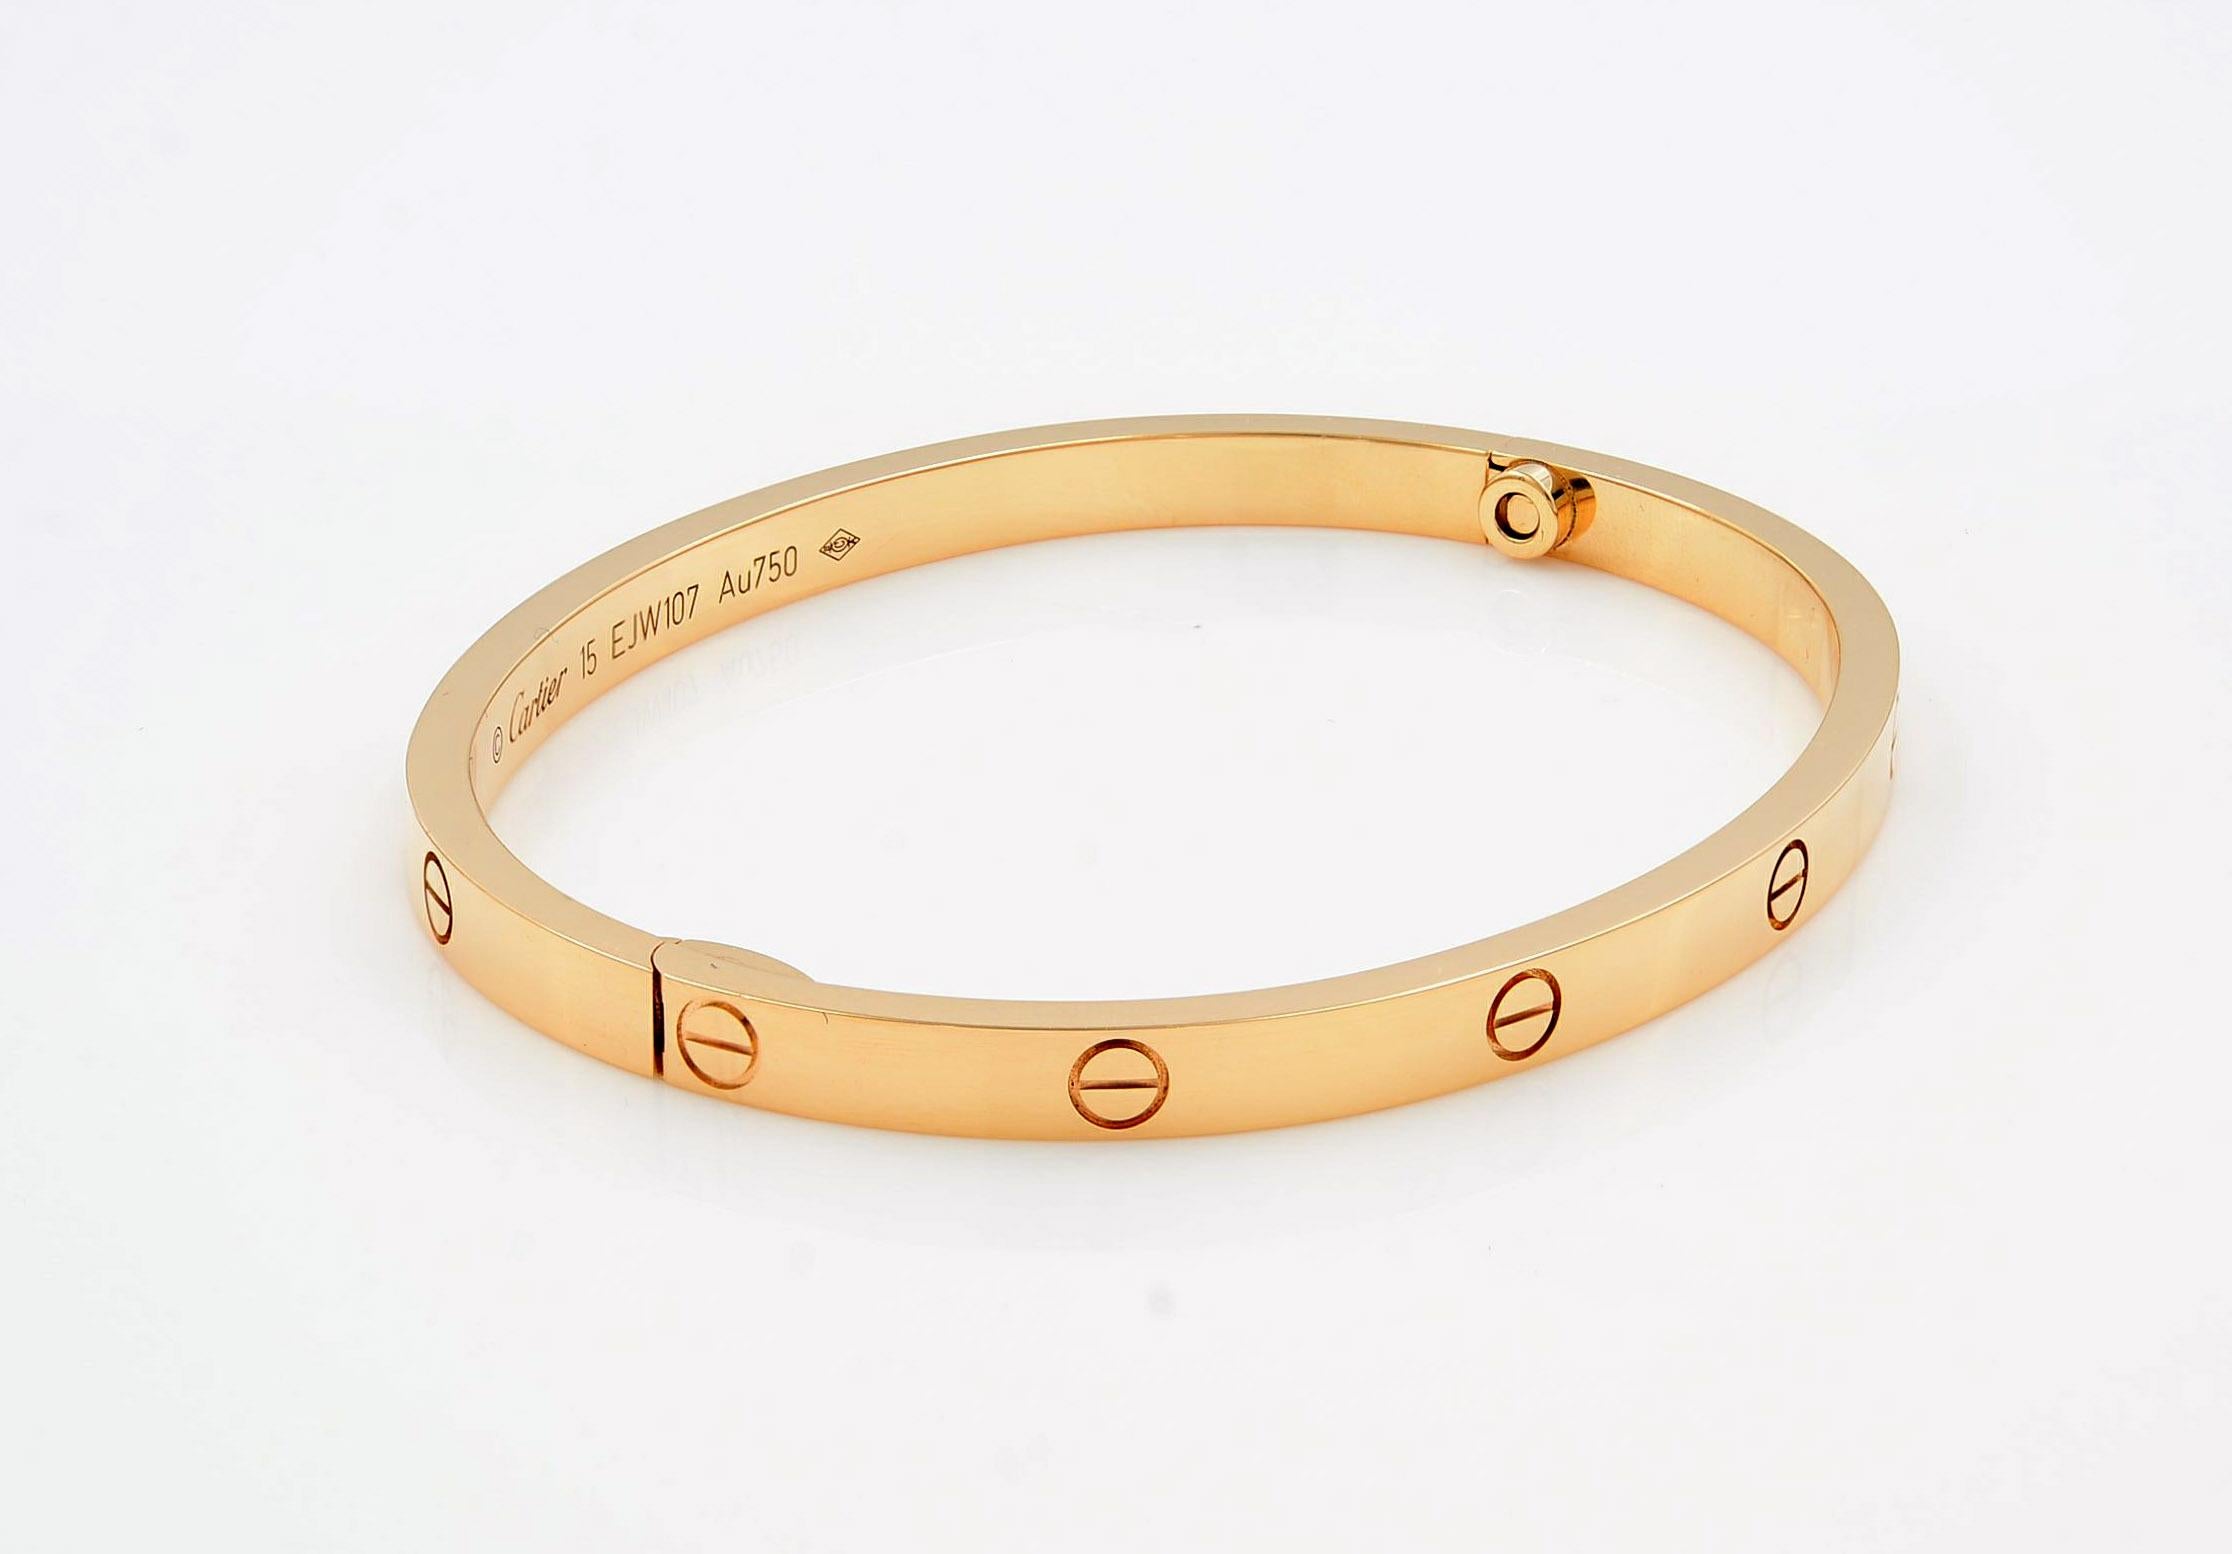 Cartier Rose Gold Small Model Love Size 15 Bracelet with signature screw motif throughout and a high polish finish

Metal Type: 18K Rose Gold
Hallmark: 750, Serial Number 
Metal Finish: High Polish
Collection: Love
Condition: Very good. 

Dear